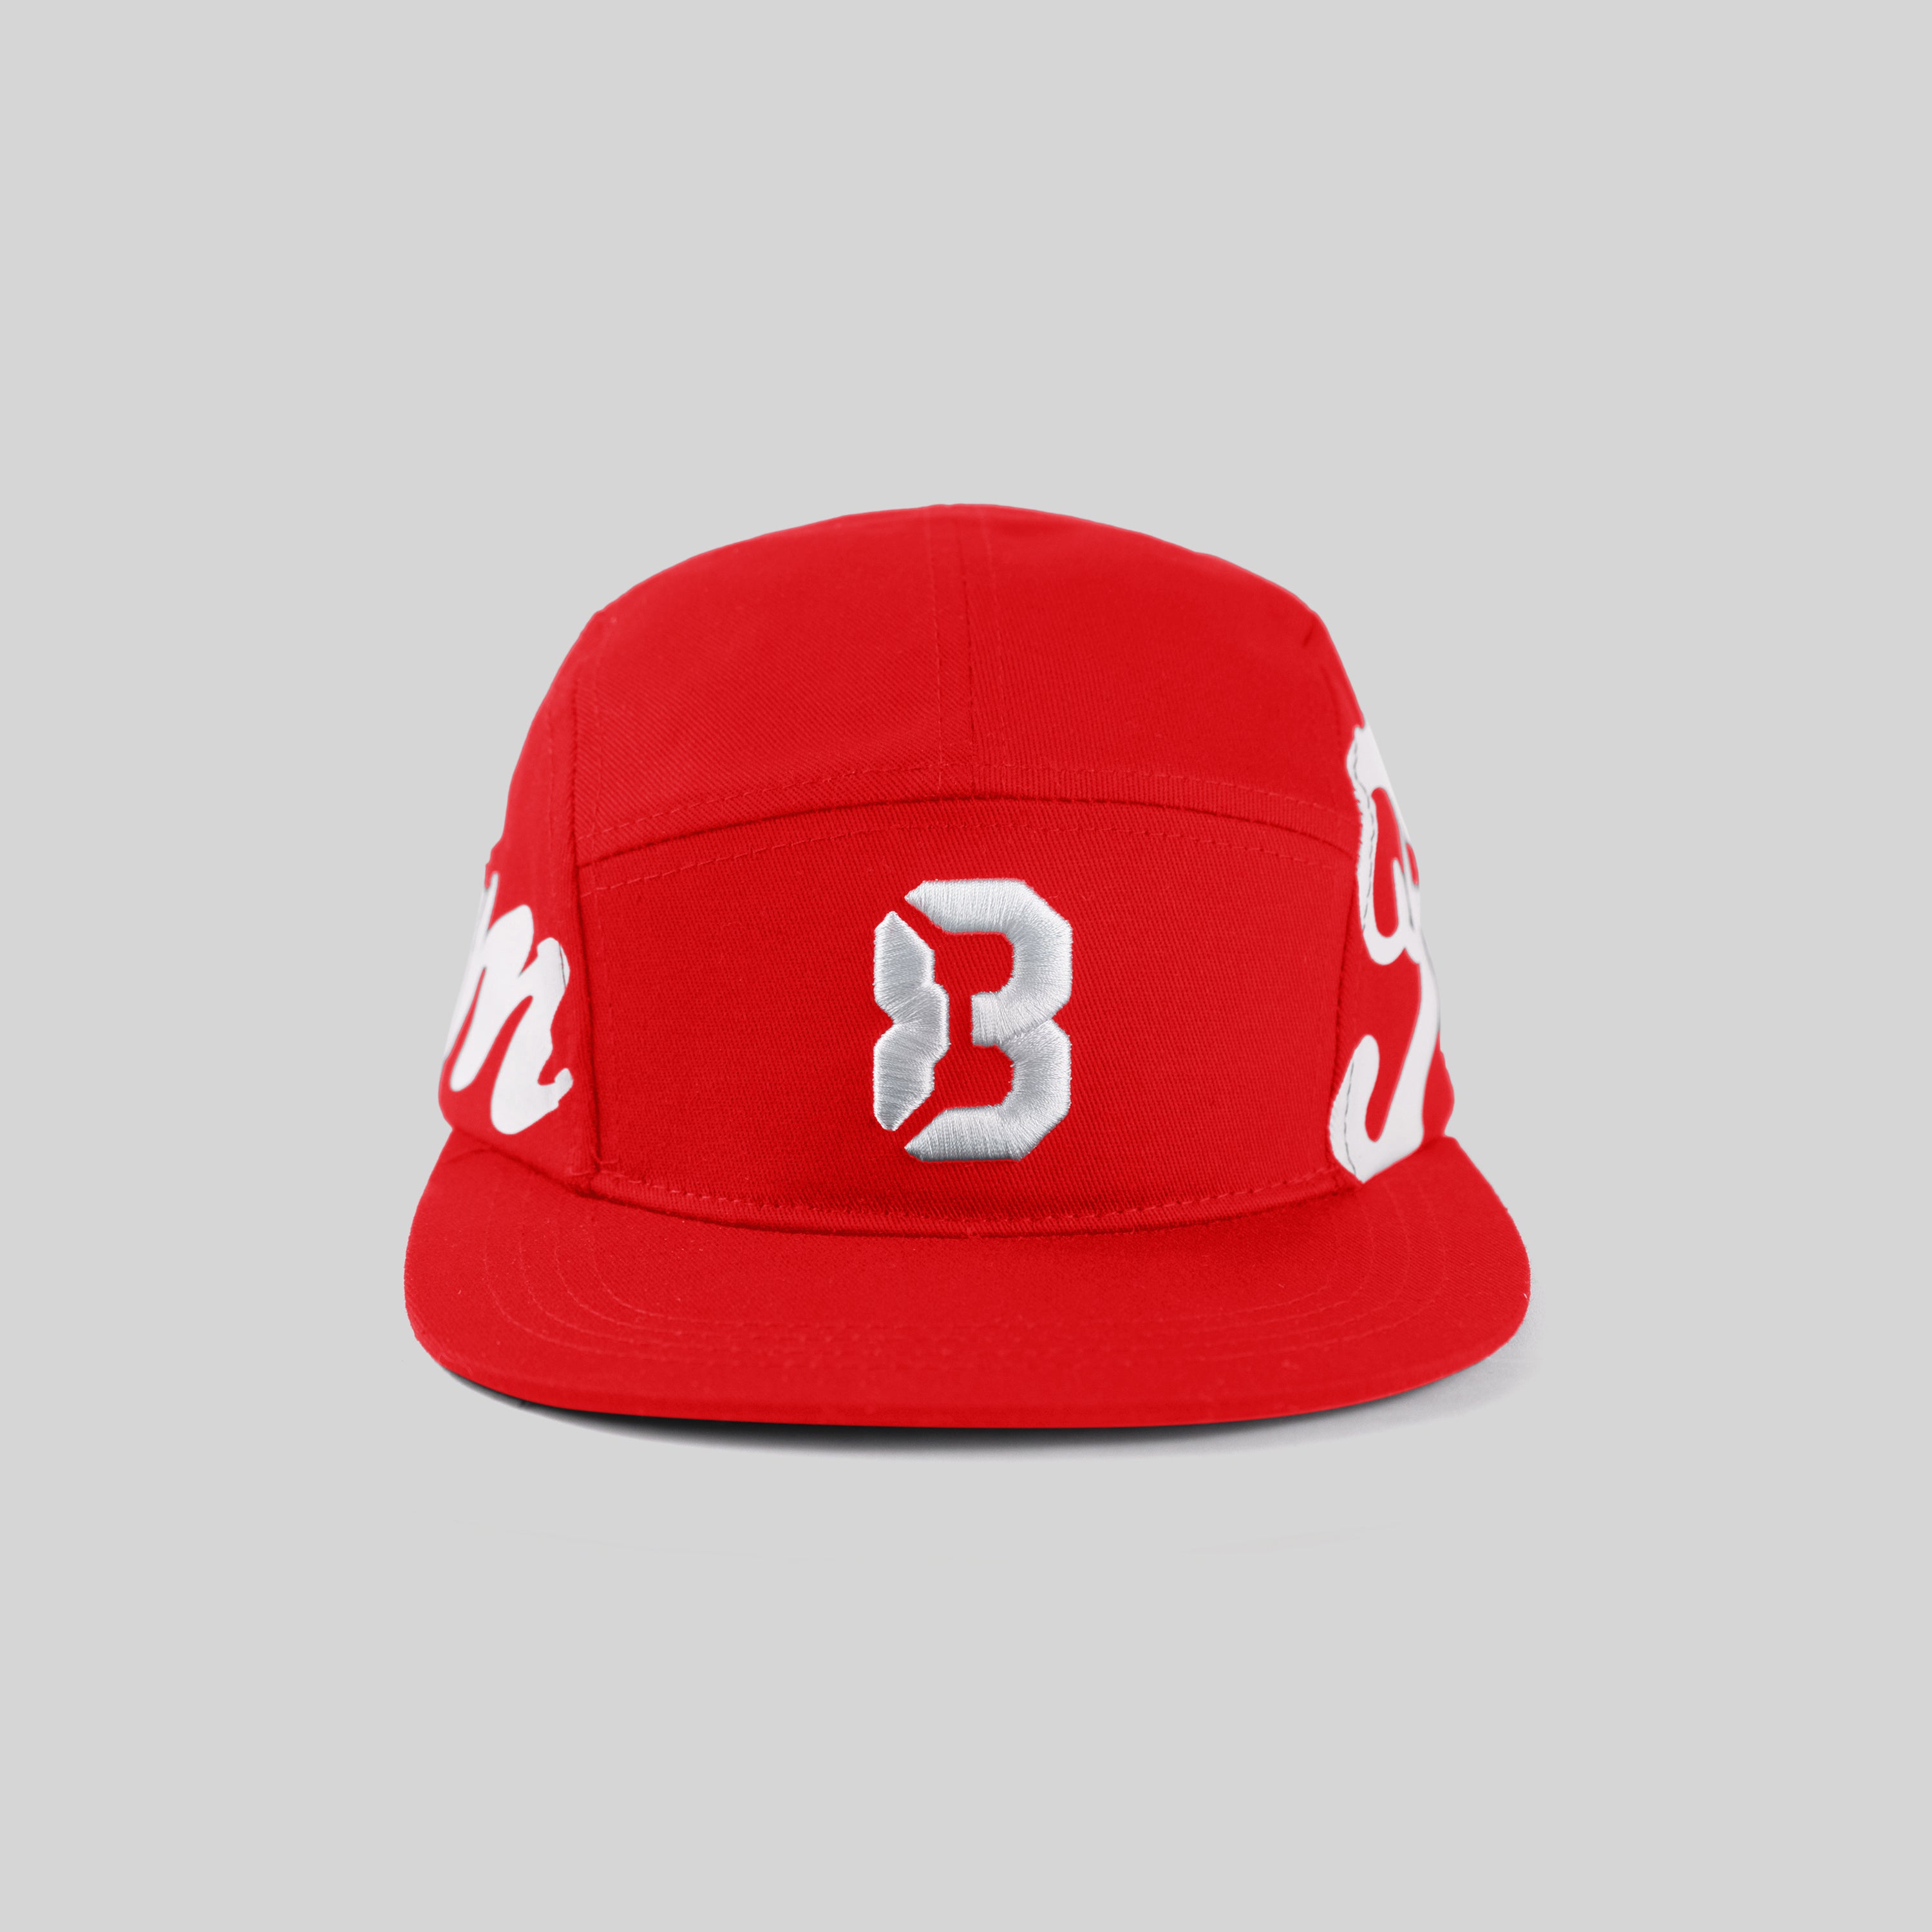 83 RED Freedom FREEDOM HAT - |